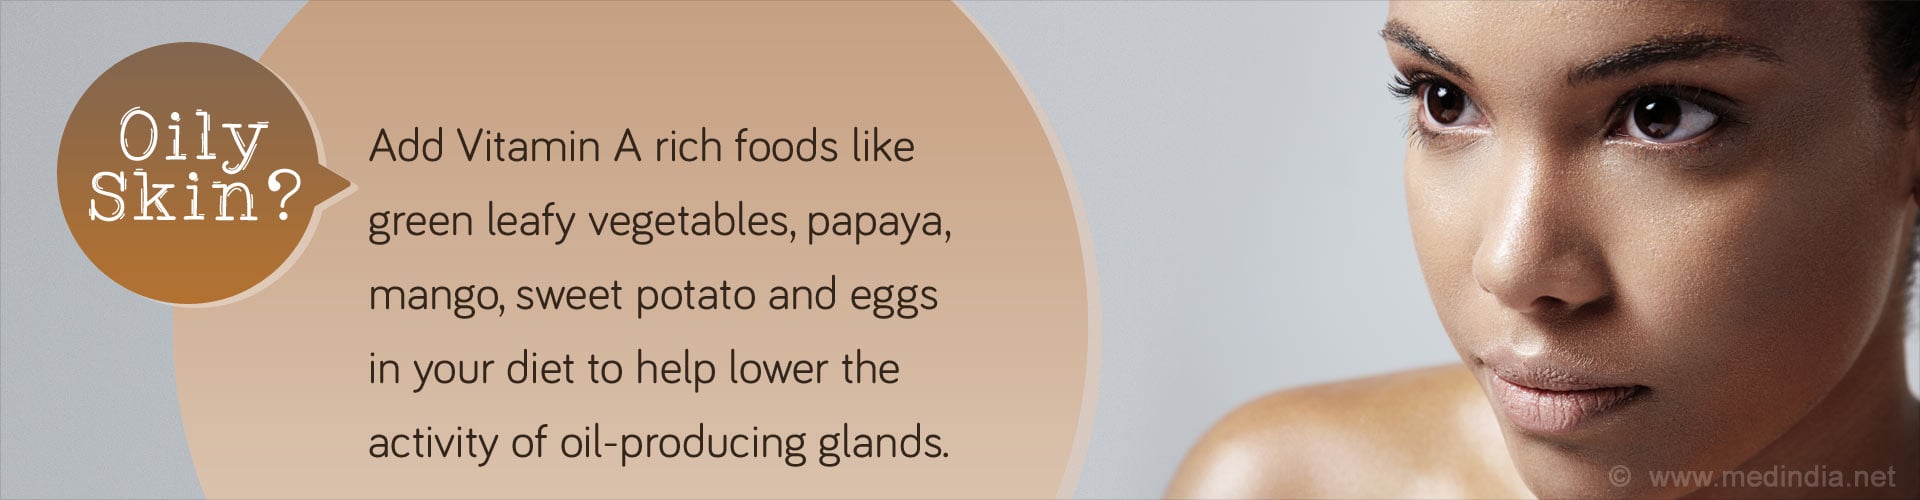 Oily Skin? Add Vitamin A rich foods like green leafy vegetables, papaya, mango, sweet potato and eggs in your diet to help lower the activity of oil - producing glands.